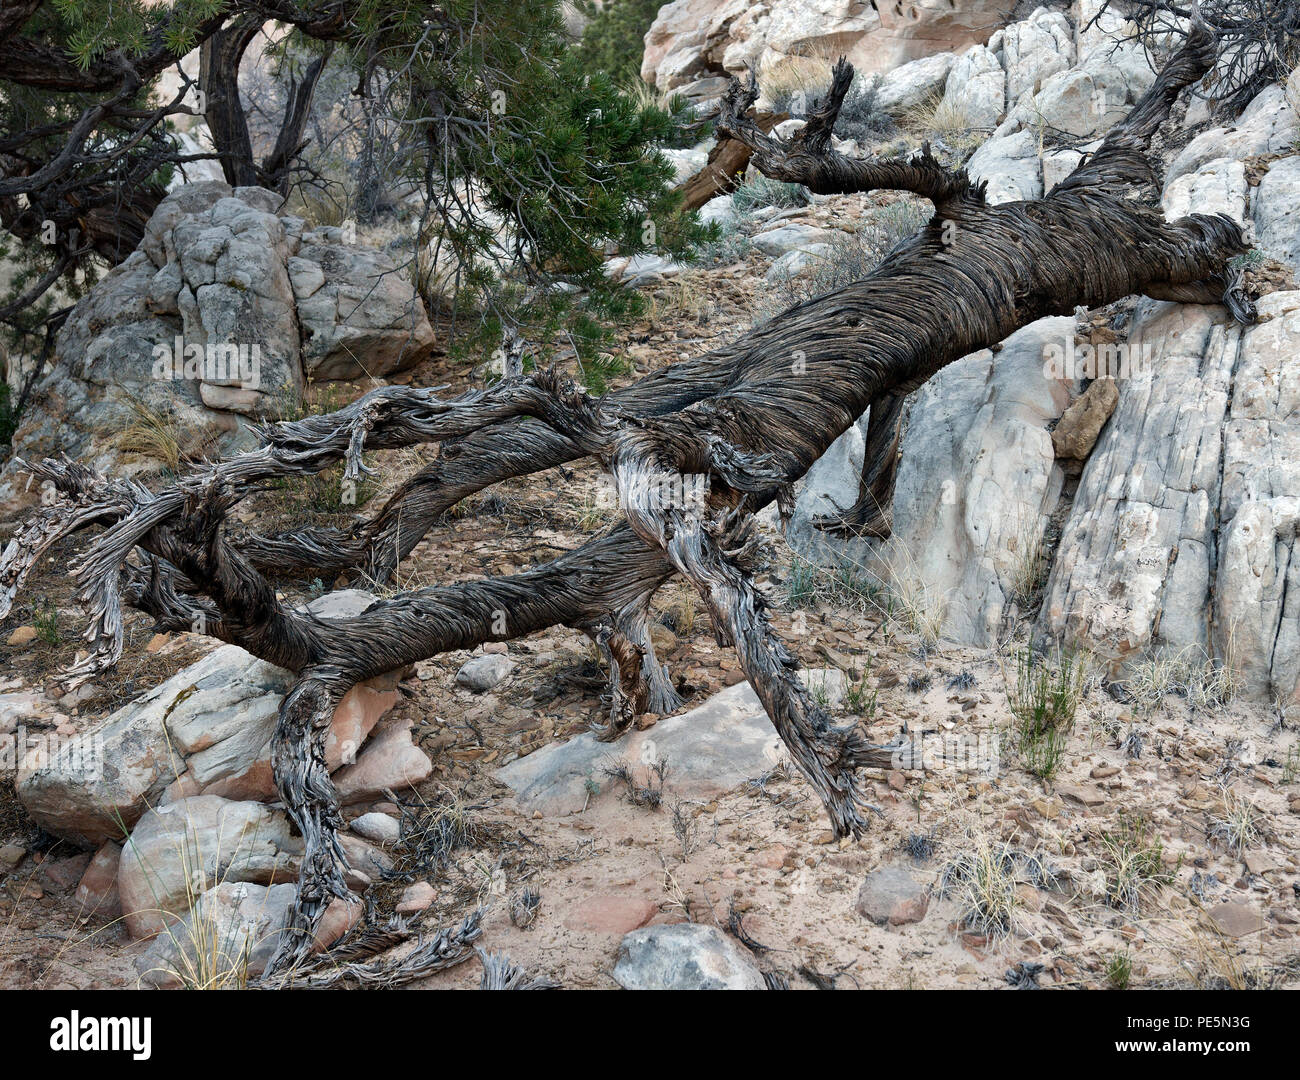 Desiccated Bristlecone Pine tree along the Navajo Knobs trail in Capitol Reef National Park, Utah, United States. Stock Photo